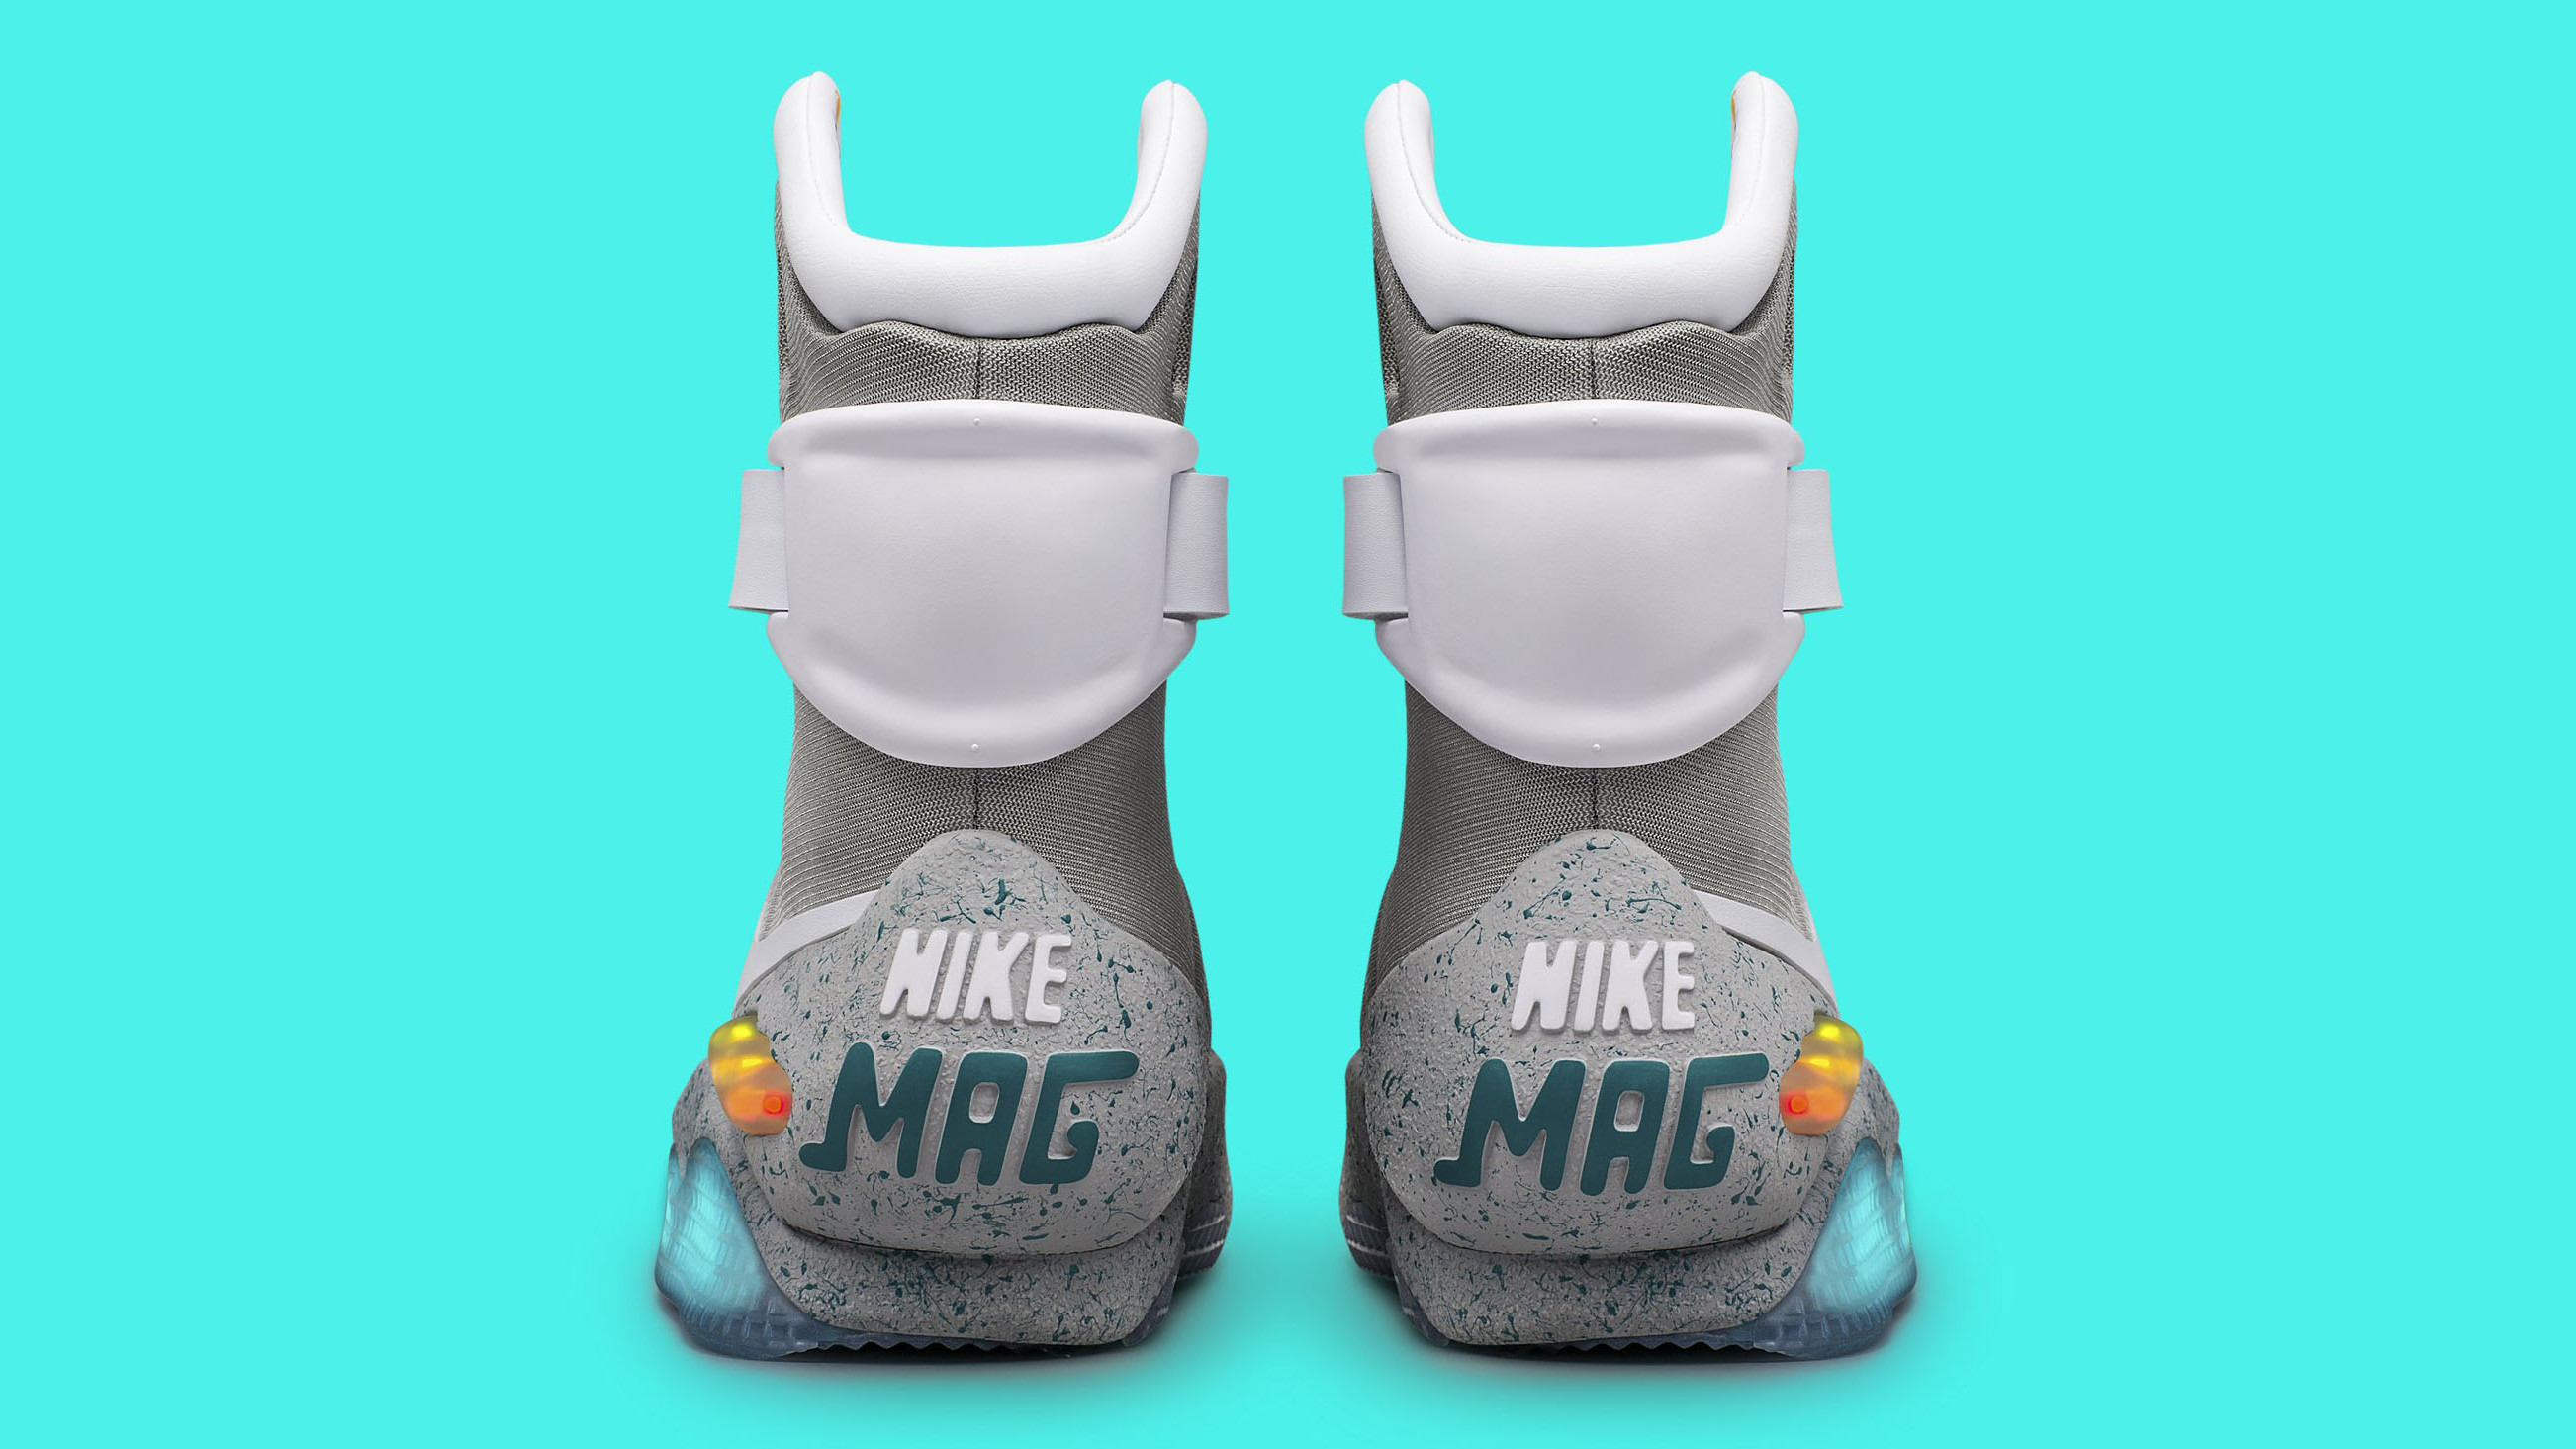 How Much Are Nike Mag Back to the Future Sneakers | Collector